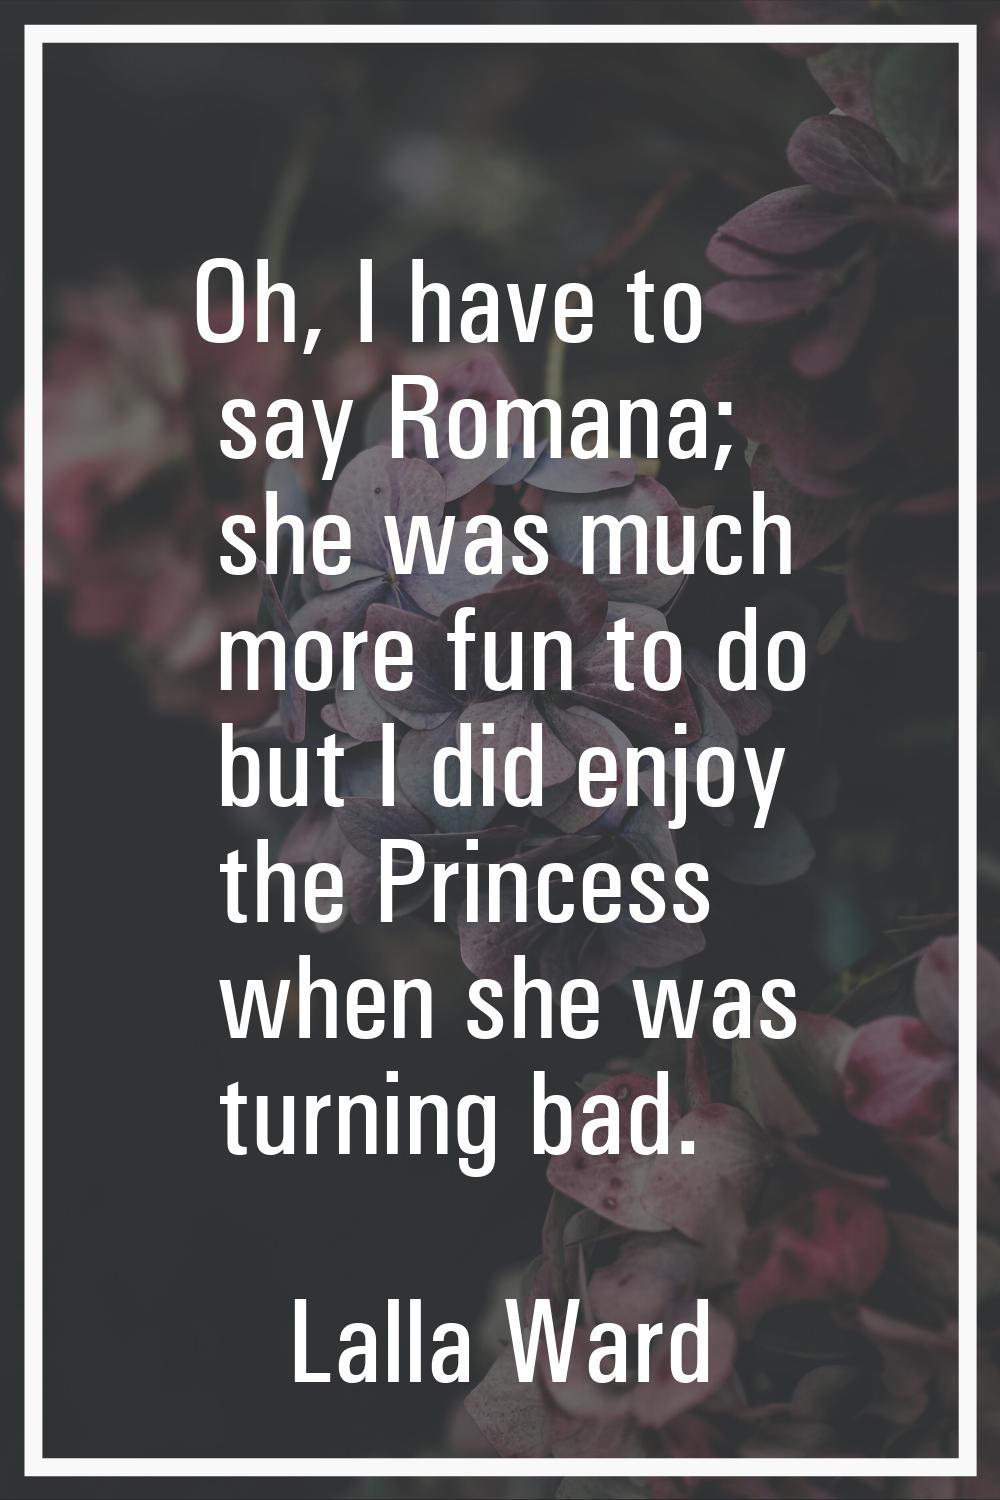 Oh, I have to say Romana; she was much more fun to do but I did enjoy the Princess when she was tur